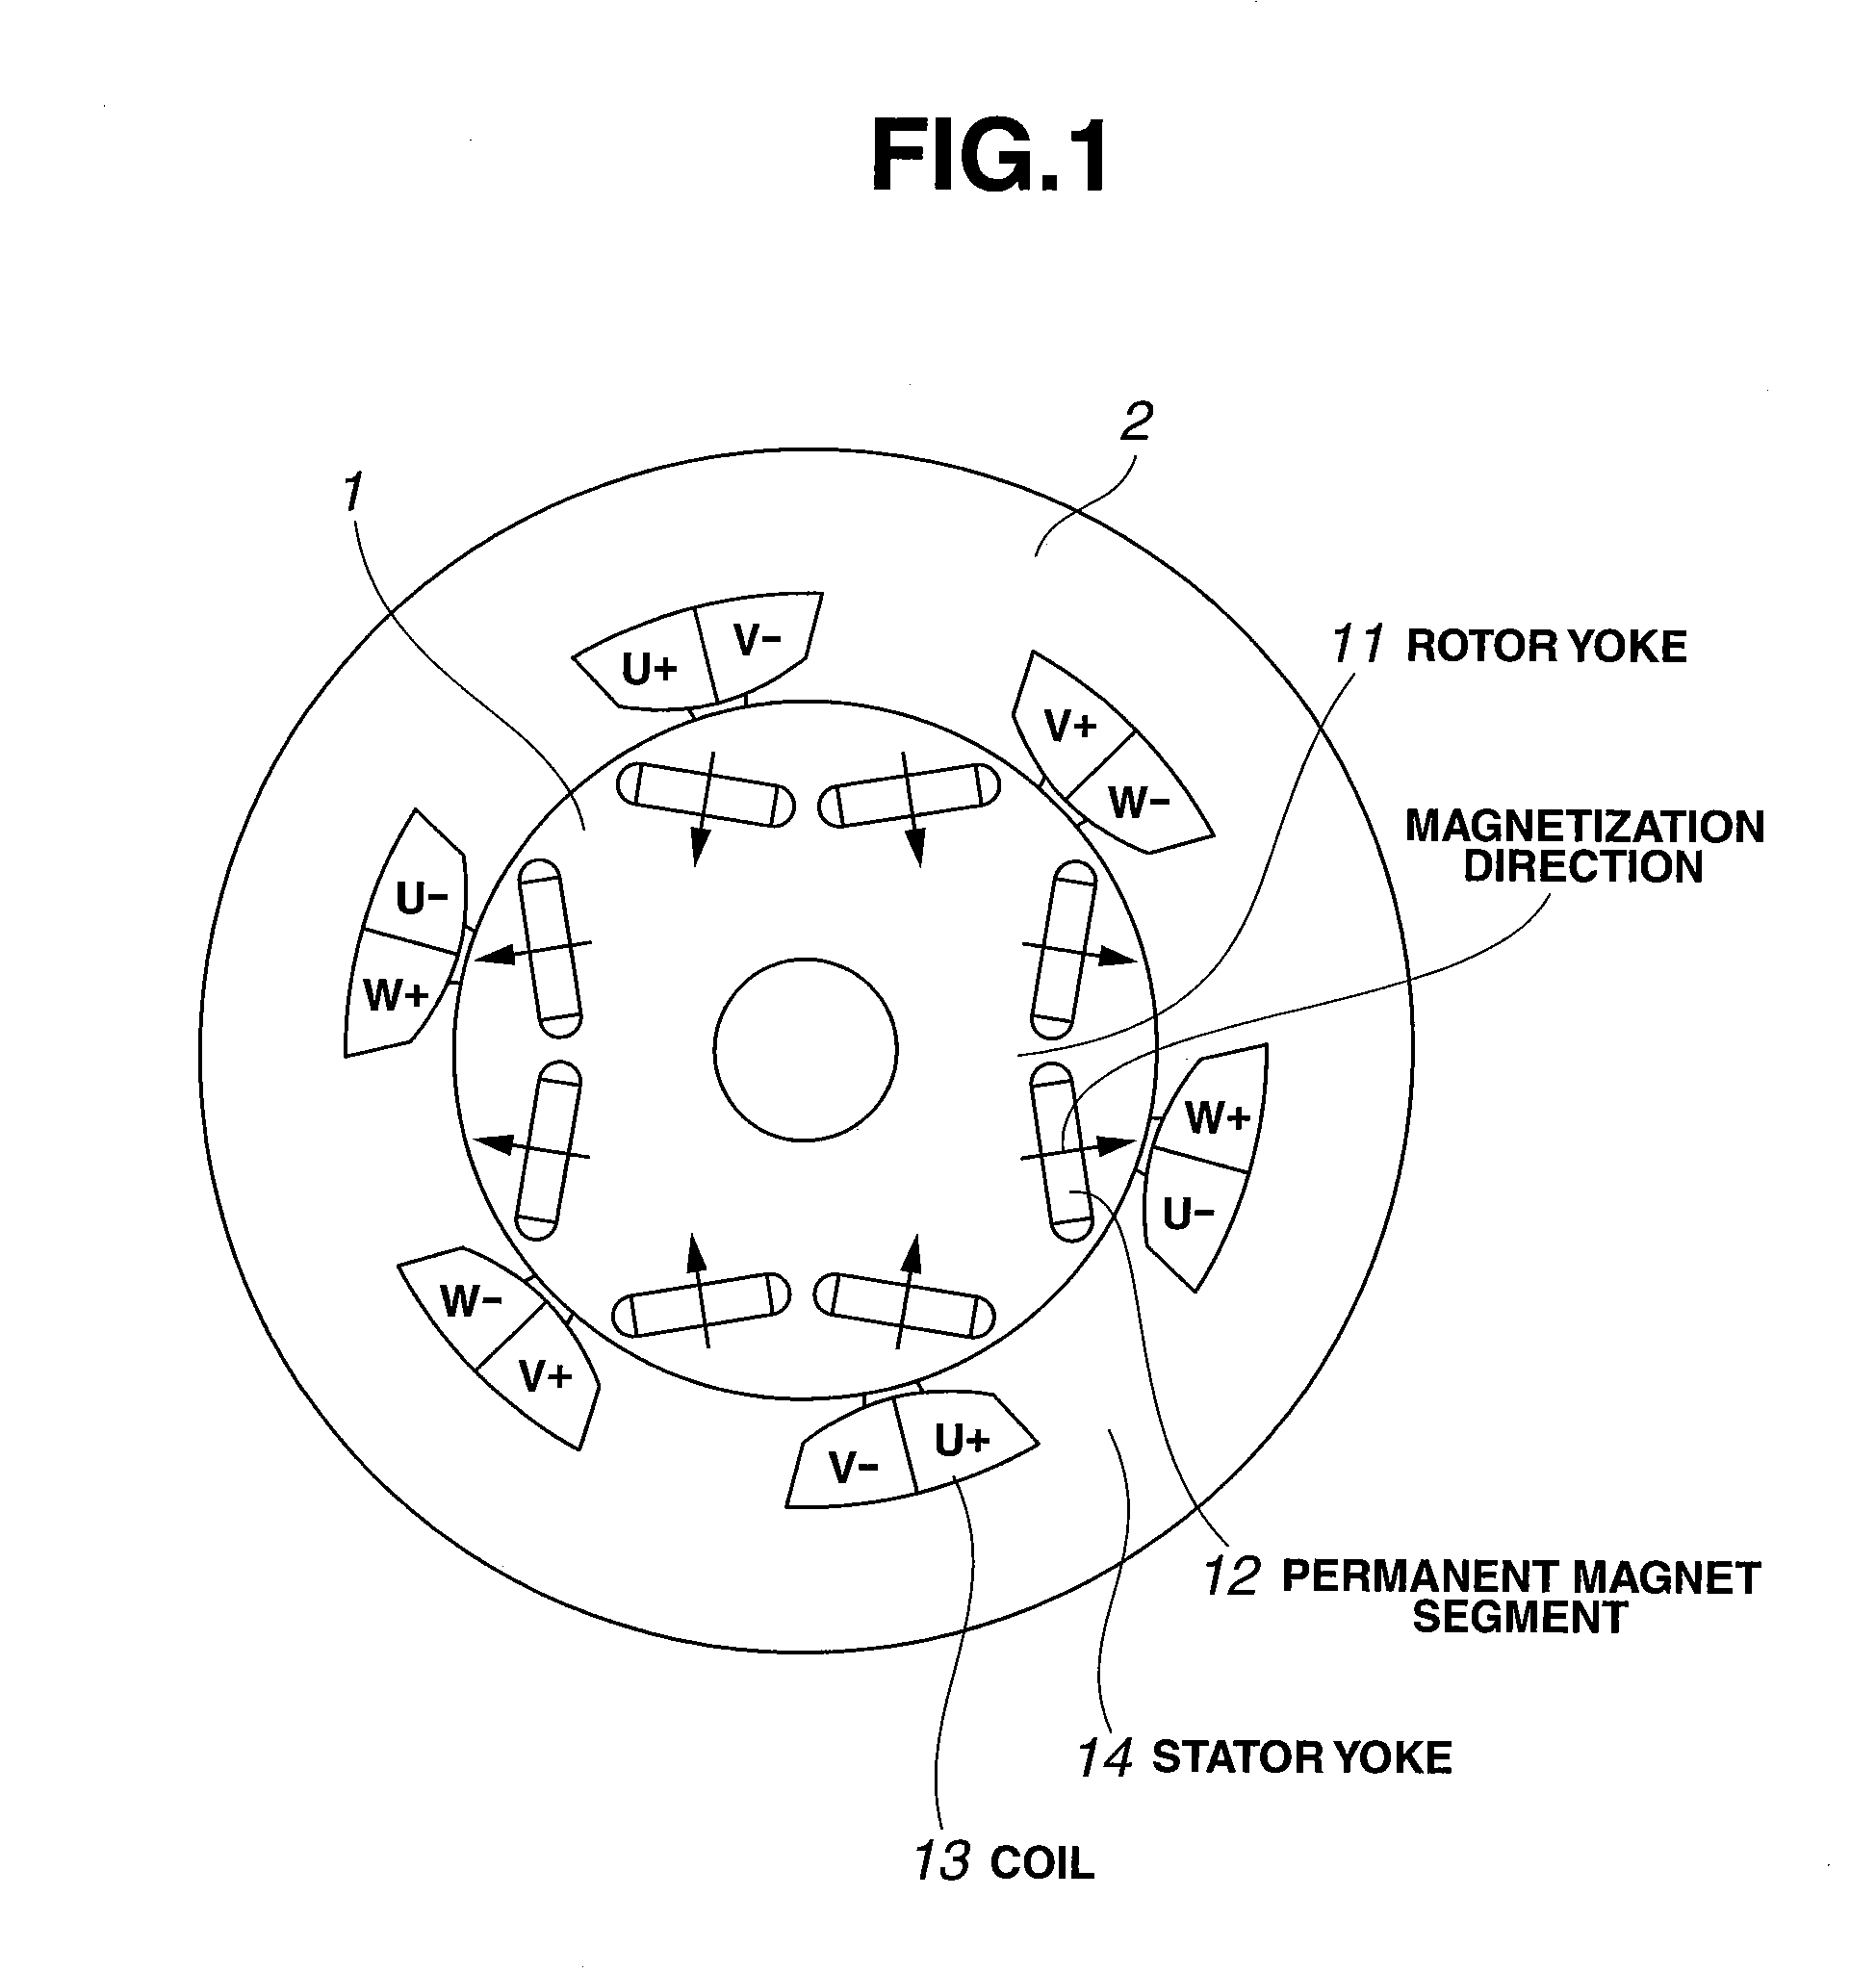 Method for assembling rotor for use in ipm rotary machine